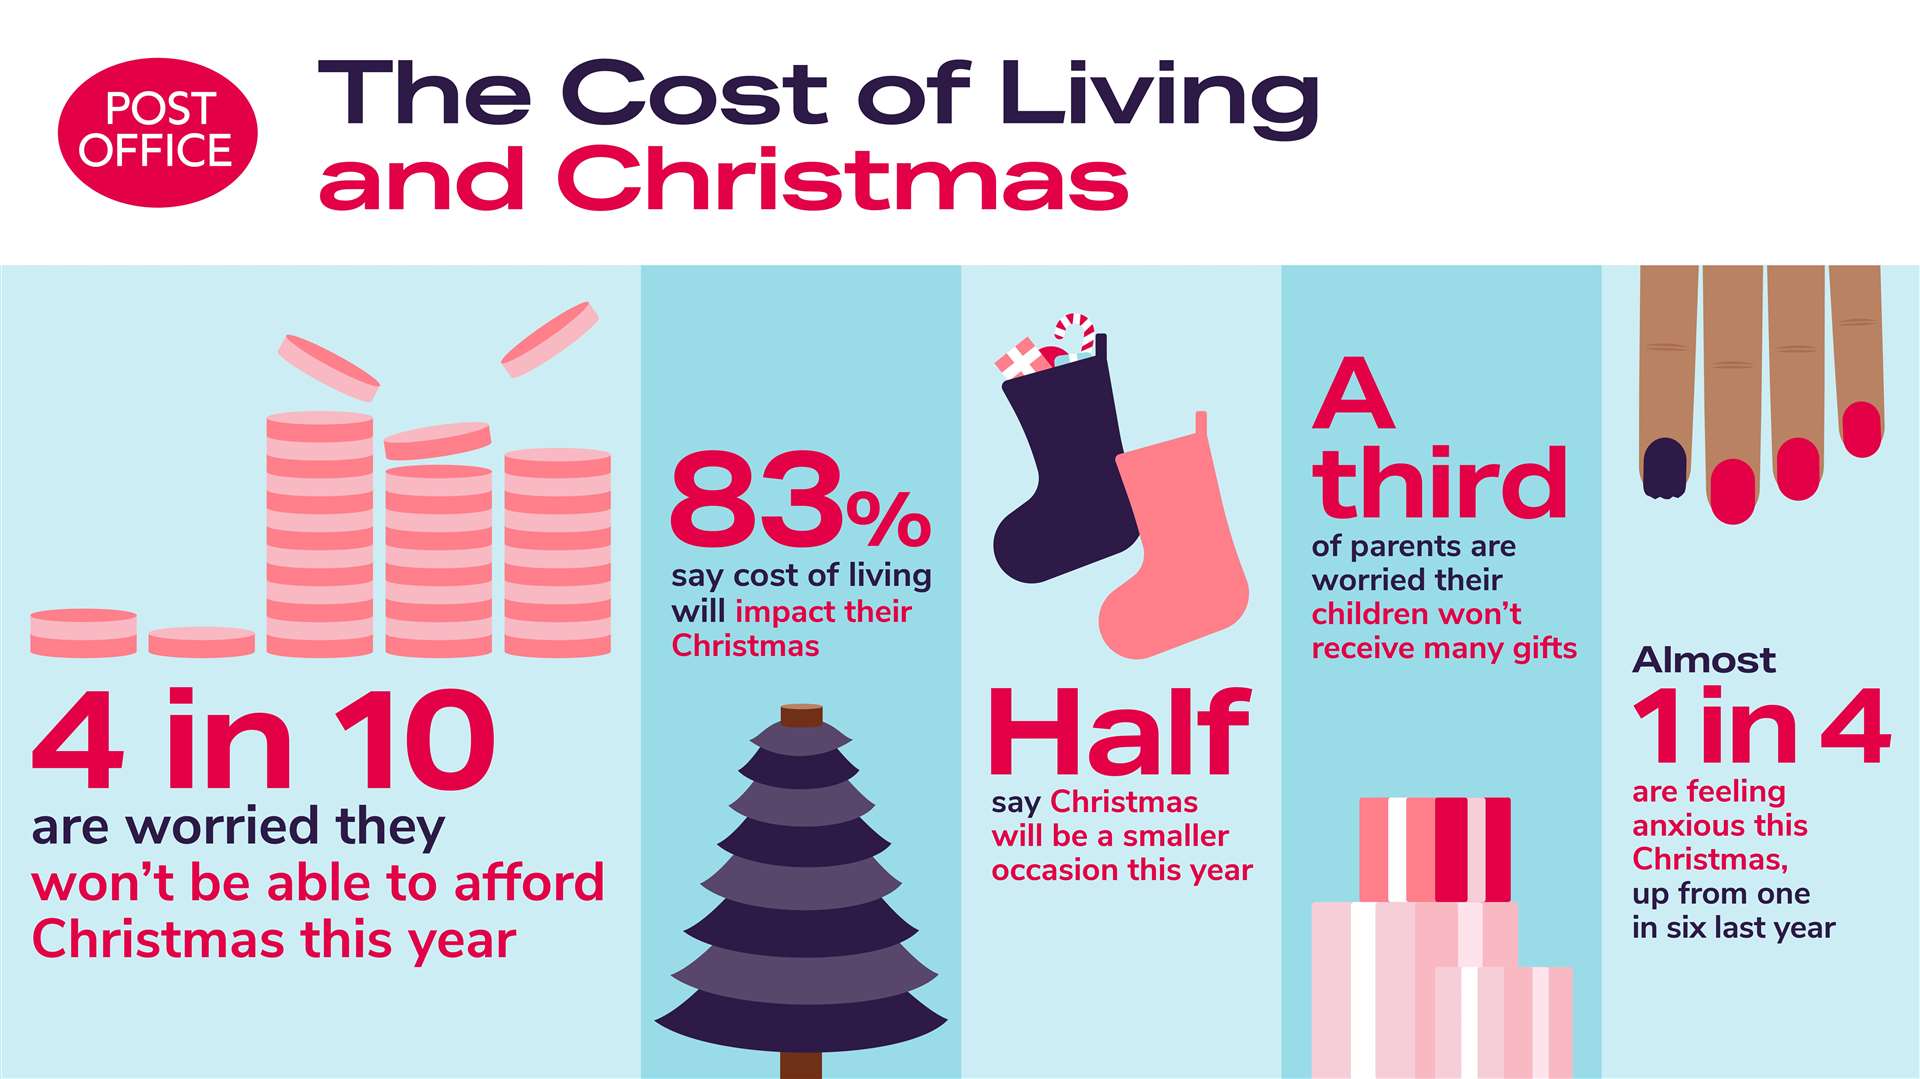 Of those surveyed, 83 per cent said the cost of living will impact on Christmas.